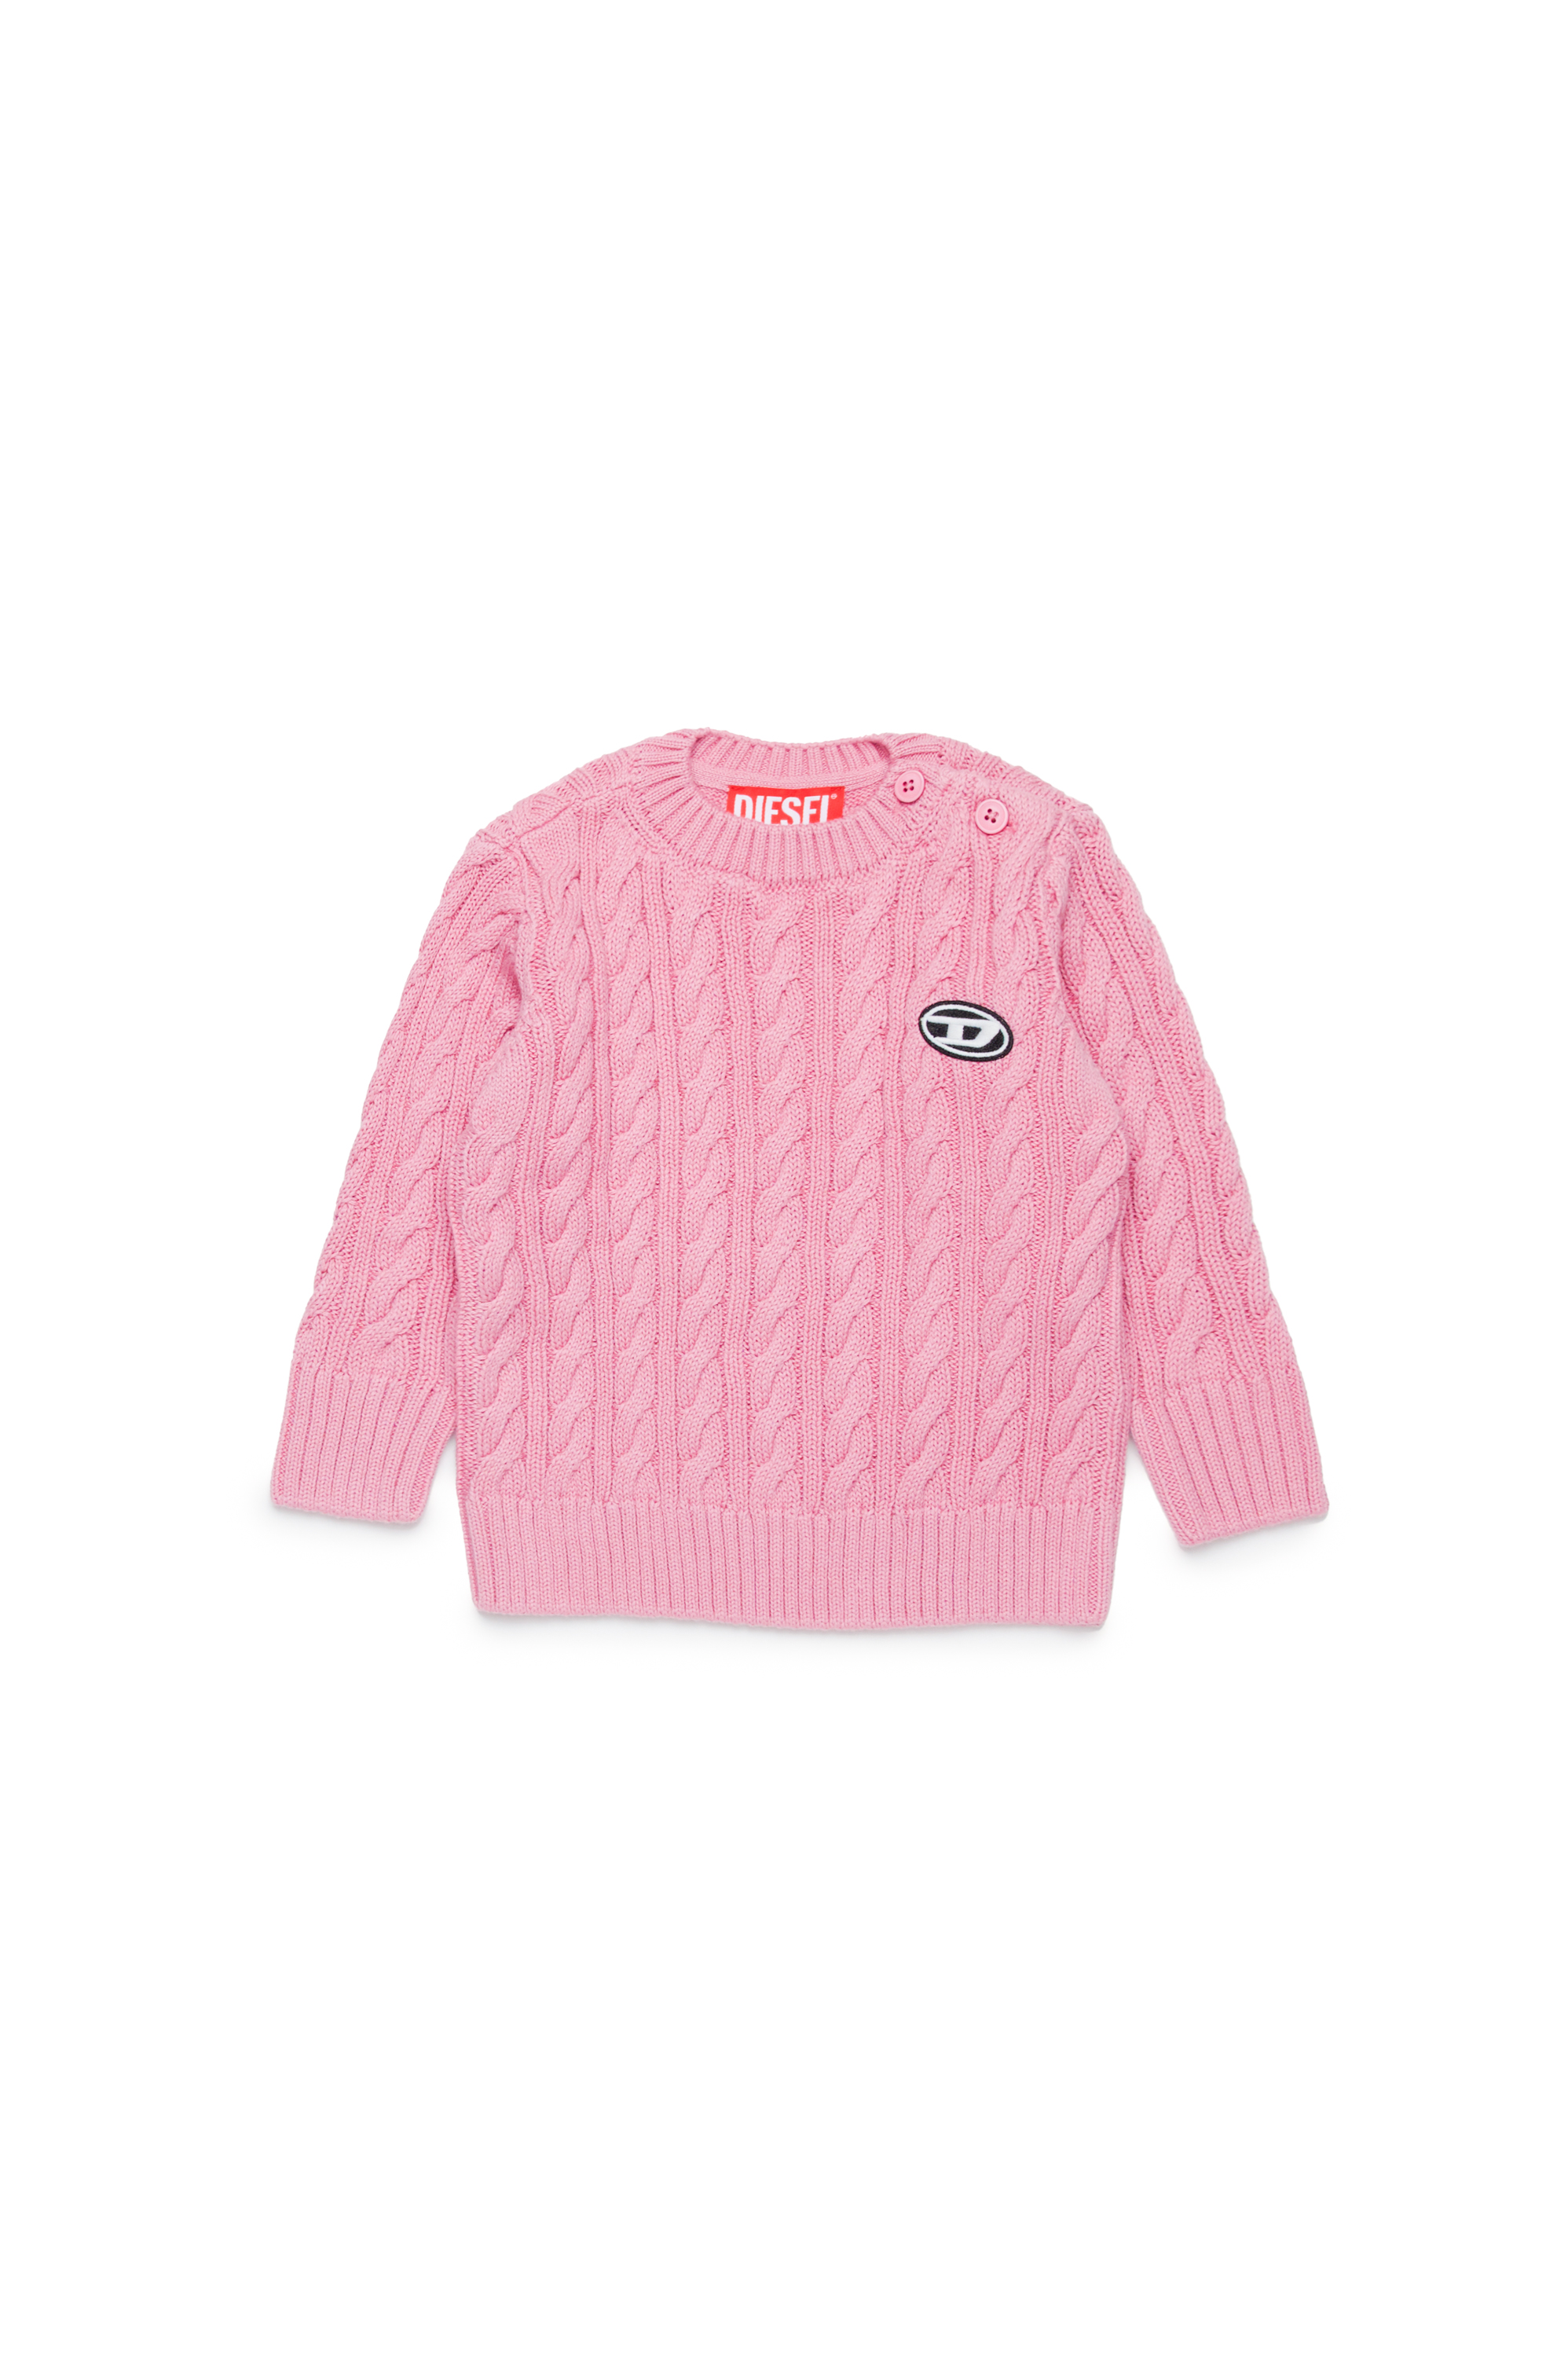 Diesel - KBAMBYB, Unisex Pullover aus Baumwolle mit Oval D-Patch in Rosa - Image 1